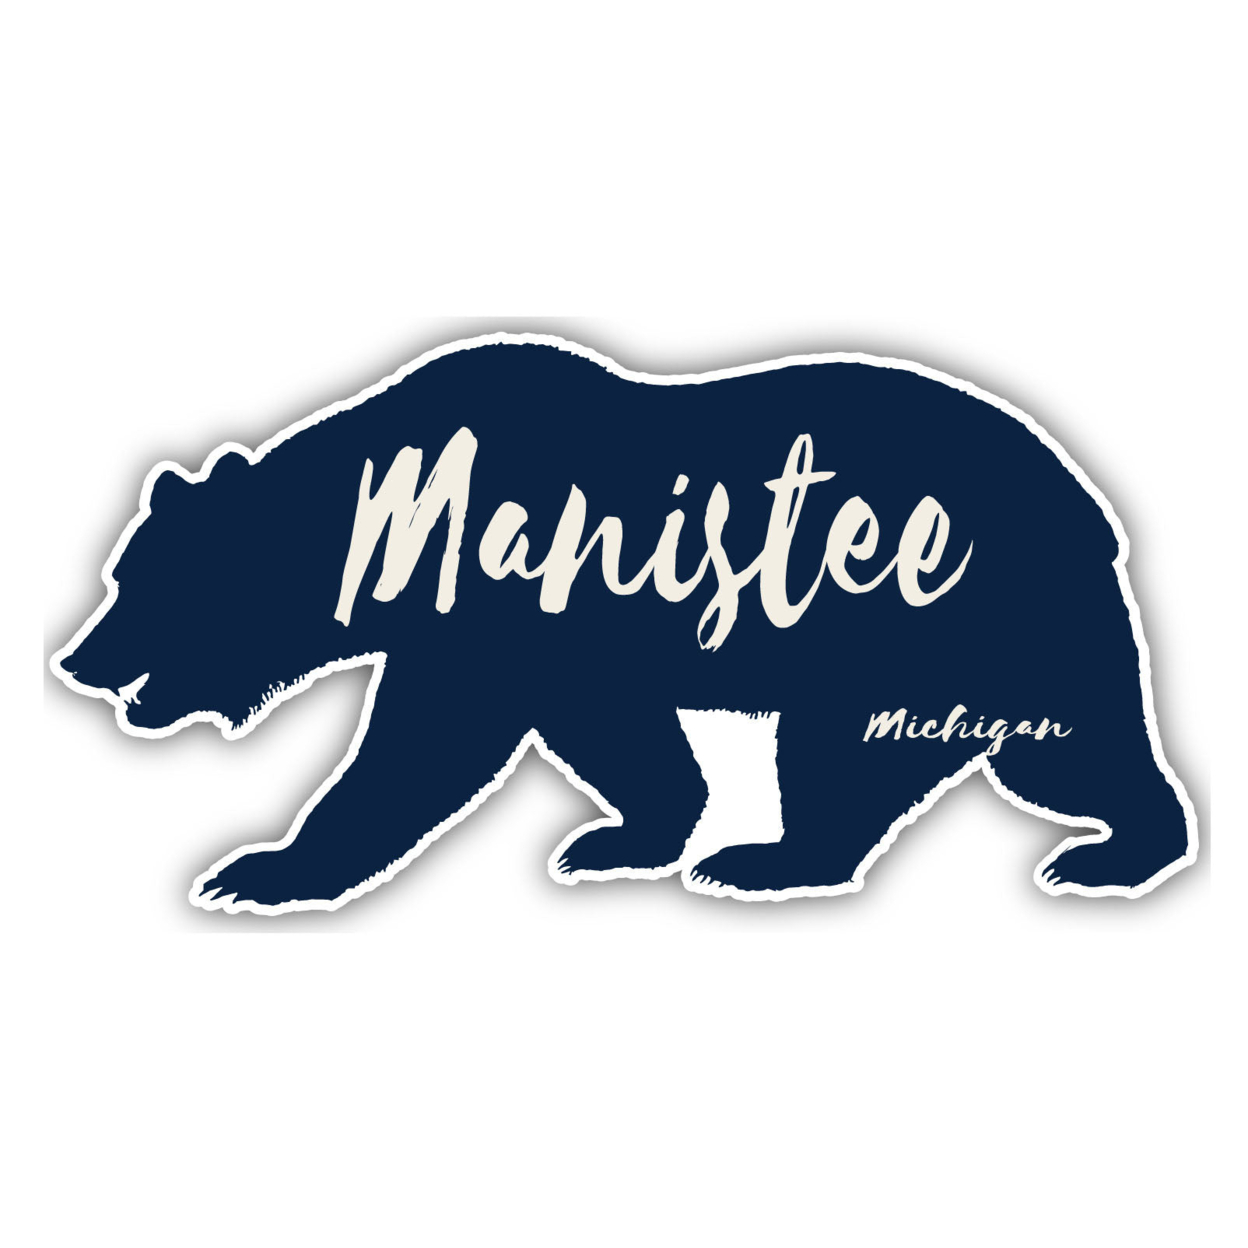 Manistee Michigan Souvenir Decorative Stickers (Choose Theme And Size) - 2-Inch, Bear